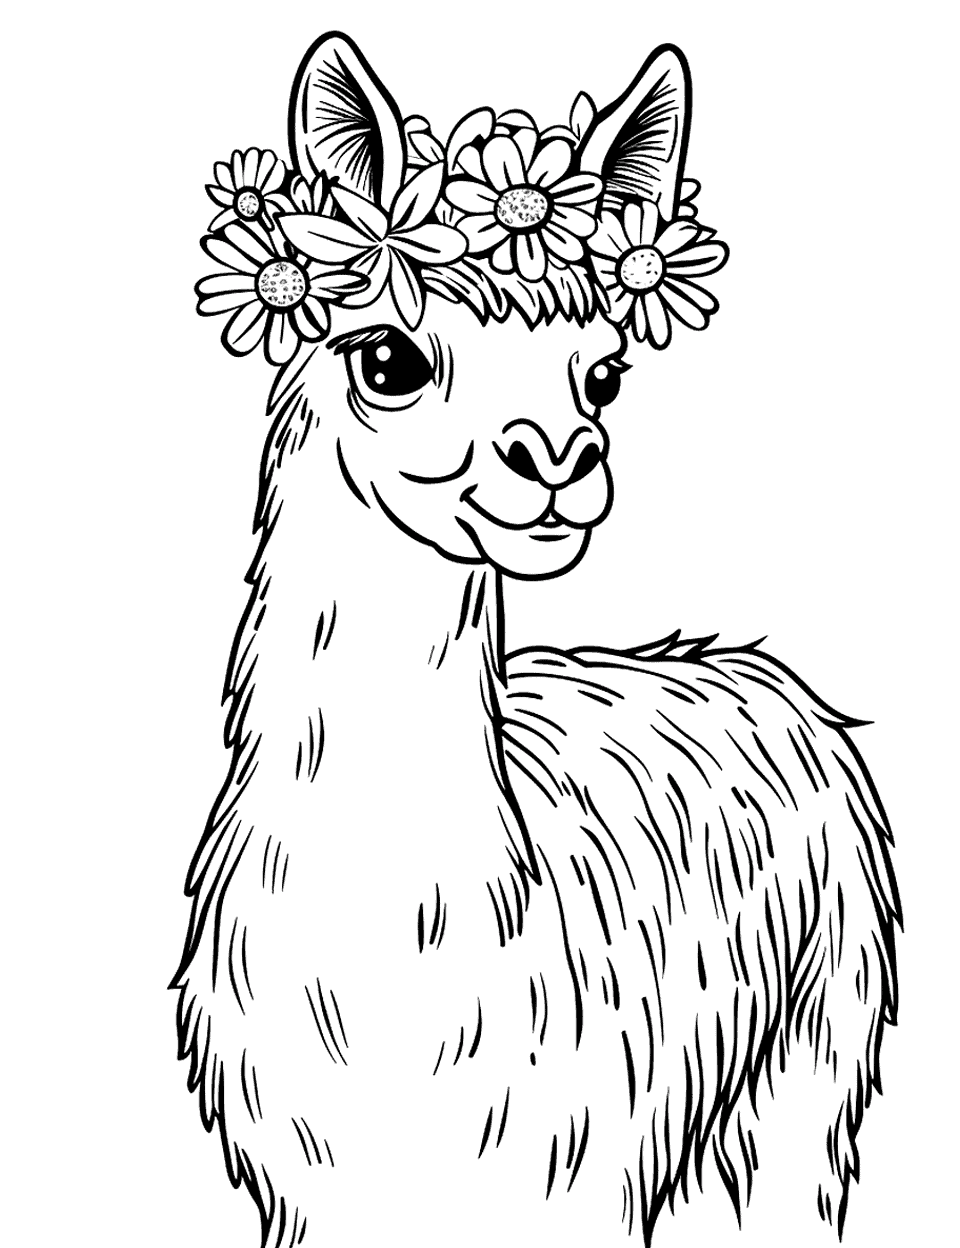 Llama Wearing a Flower Crown Coloring Page - A serene llama adorned with a crown of flowers.